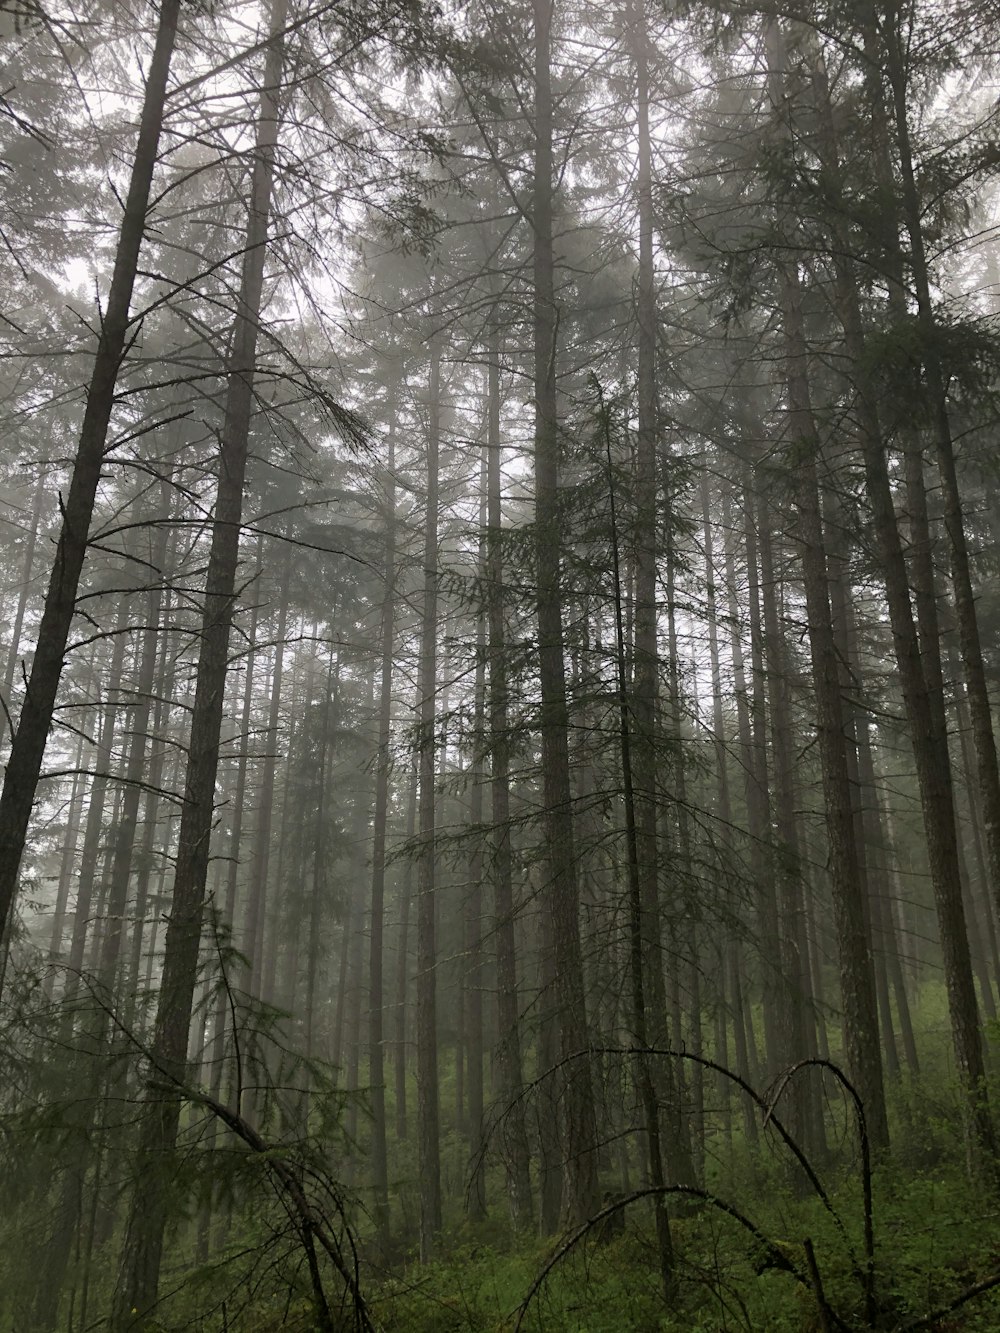 500 Foggy Forest Pictures Stunning Download Free Images On Unsplash